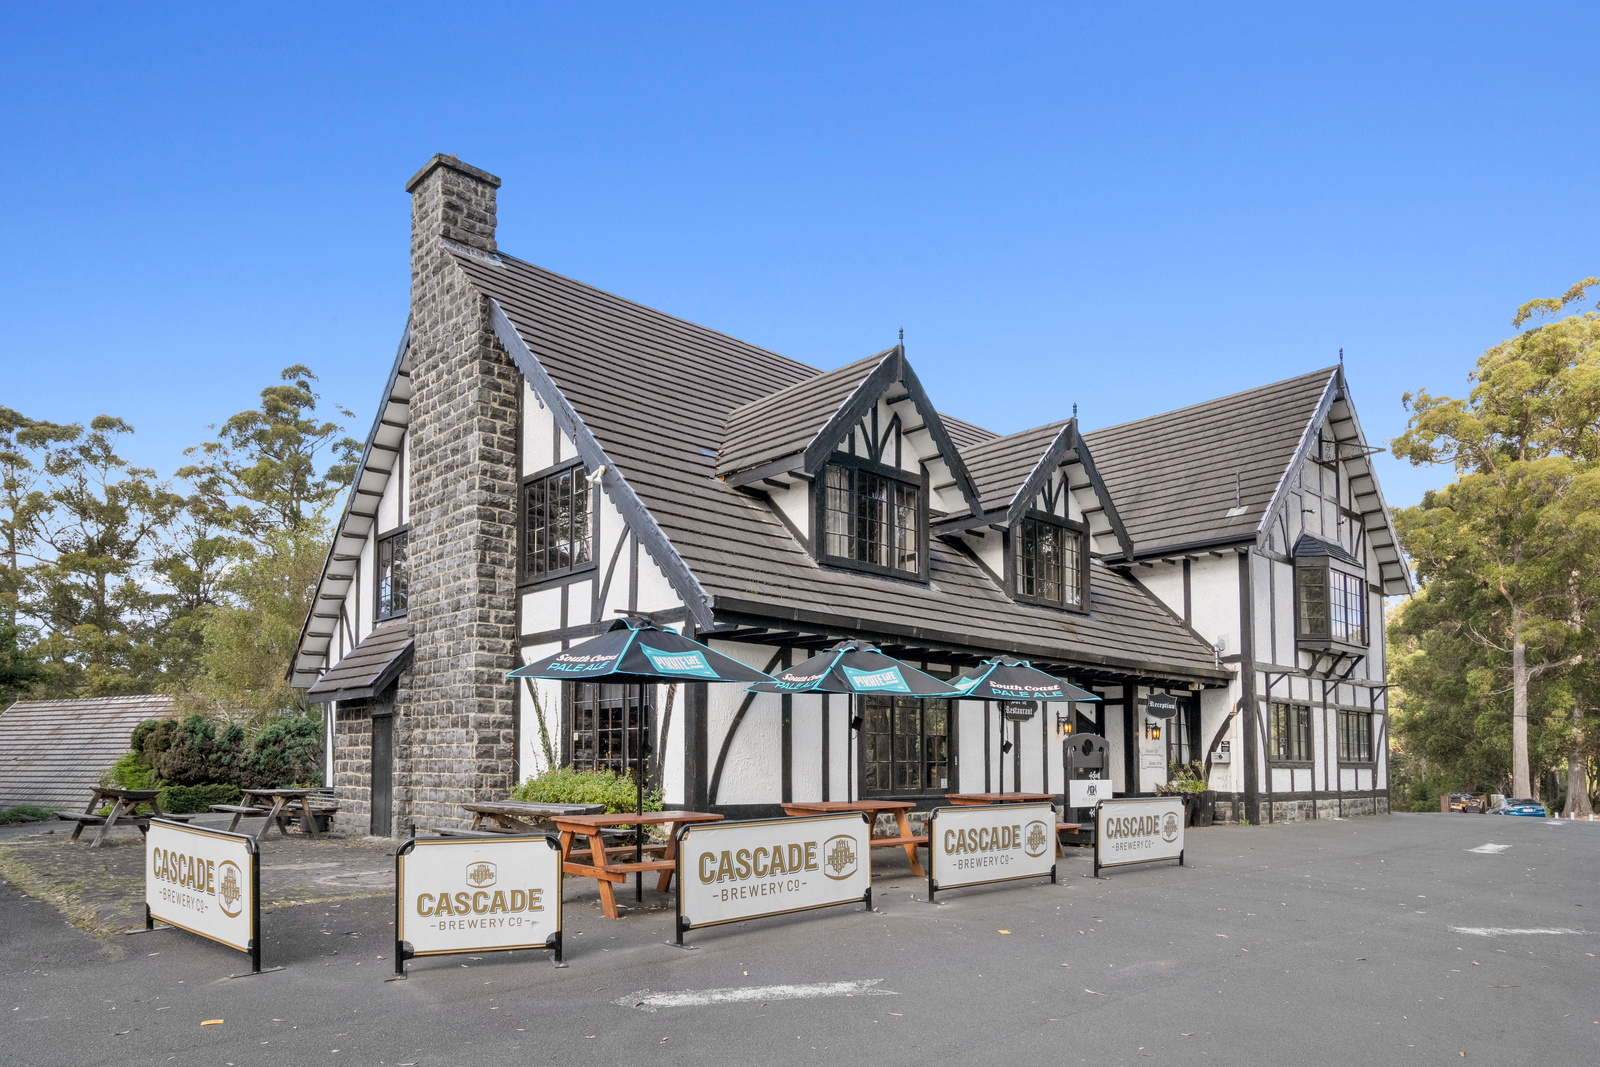 The Fox and Hounds Historic Hotel